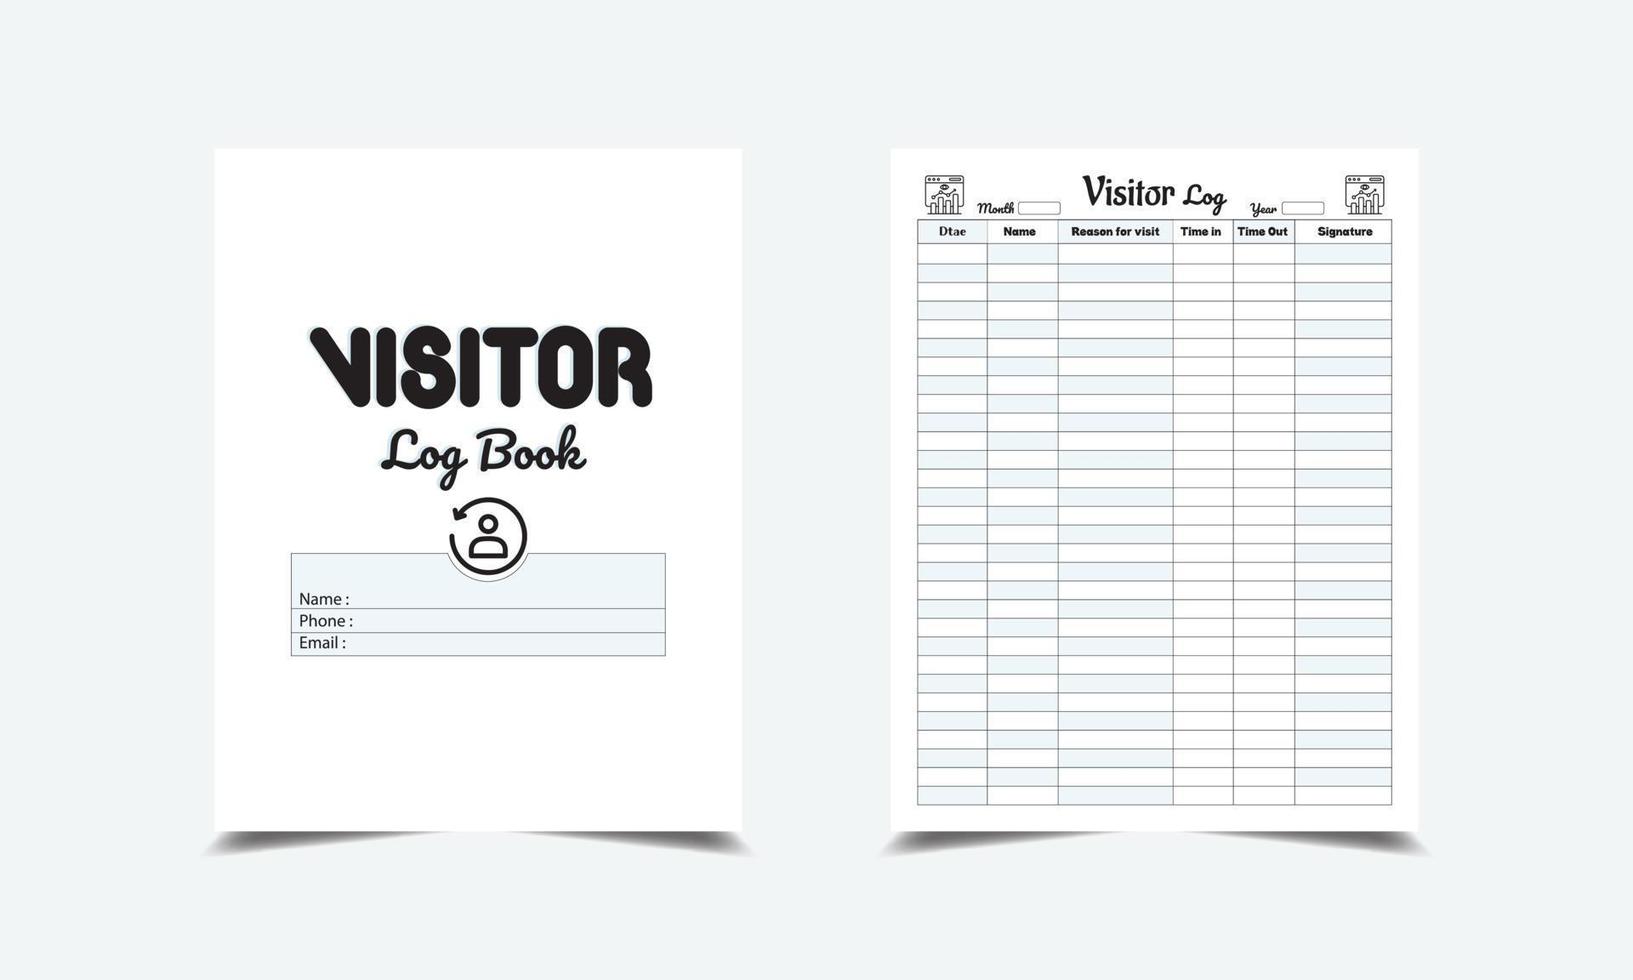 PRODUCTIVITY PLANNER for Low content KDP interior 15569802 Vector